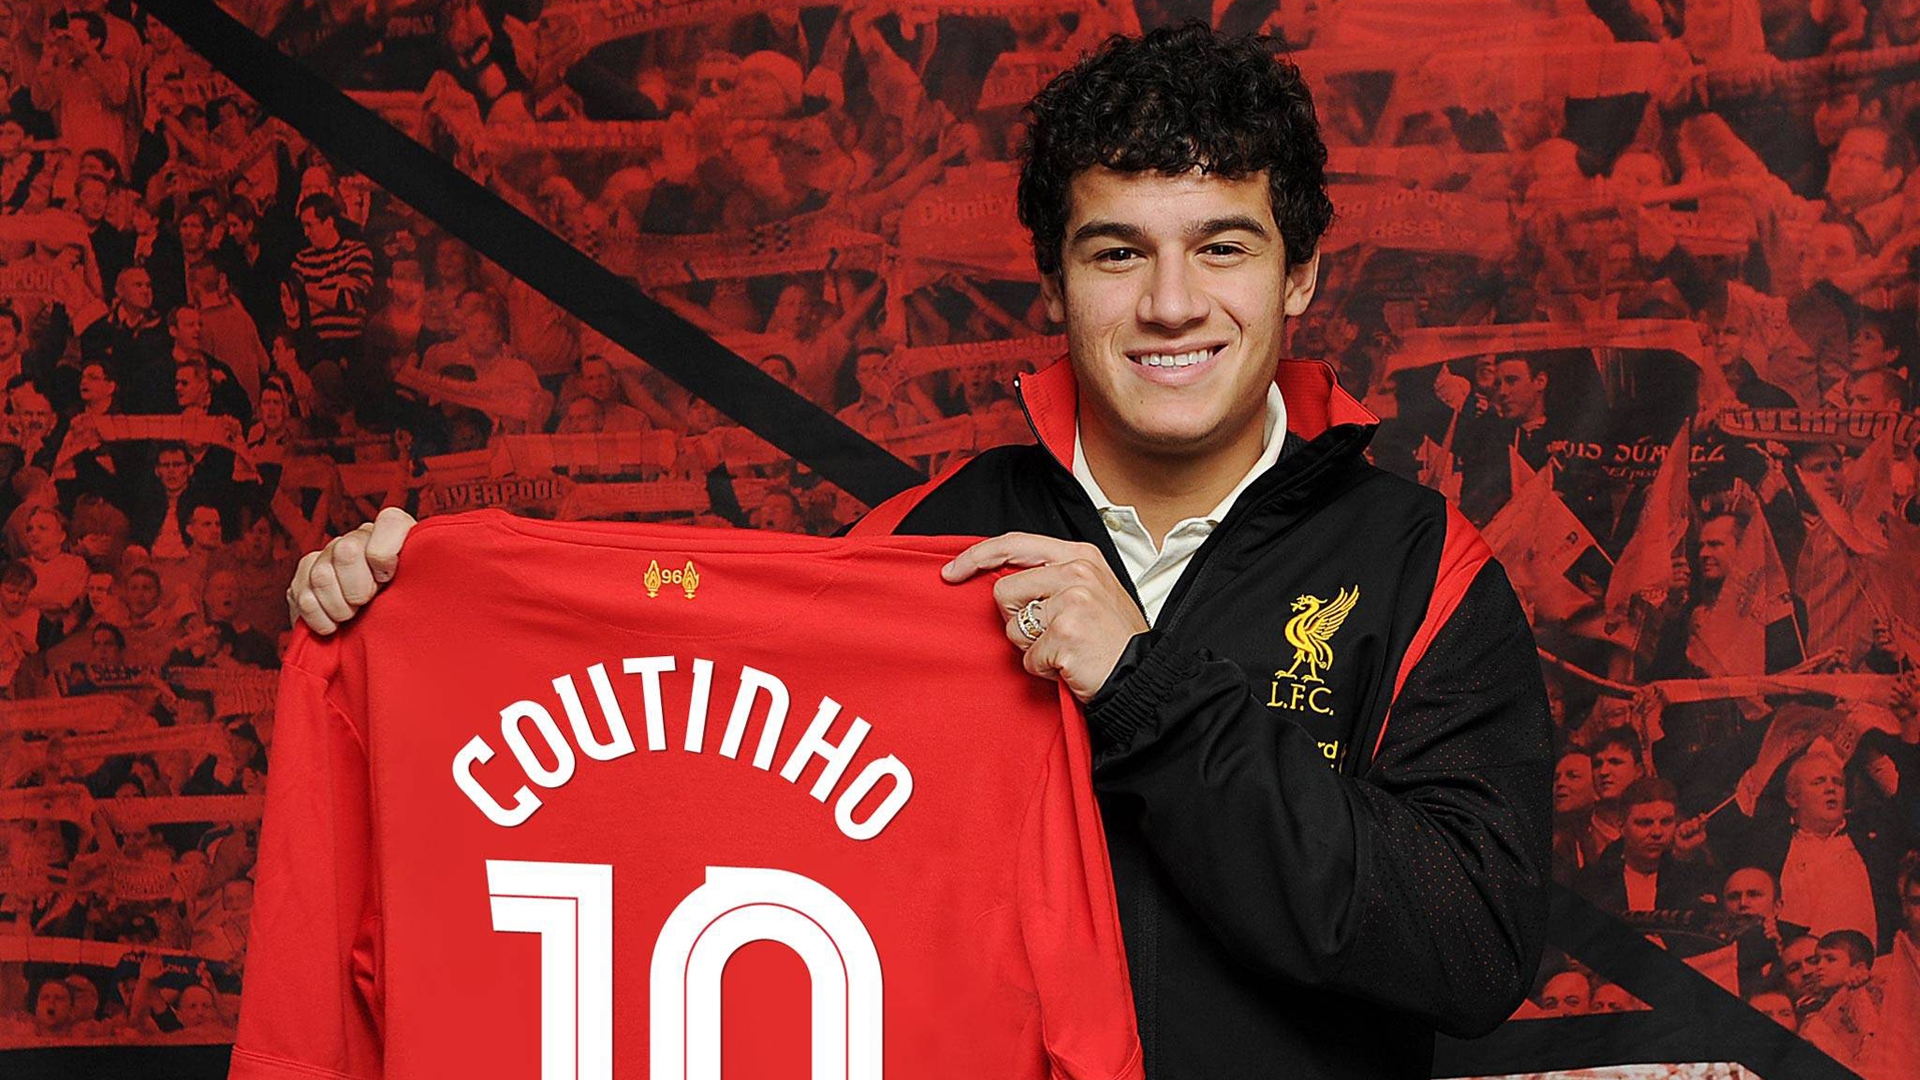 Philippe Coutinho Wallpapers Hd-6 - Coutinho Welcome To Liverpool - HD Wallpaper 